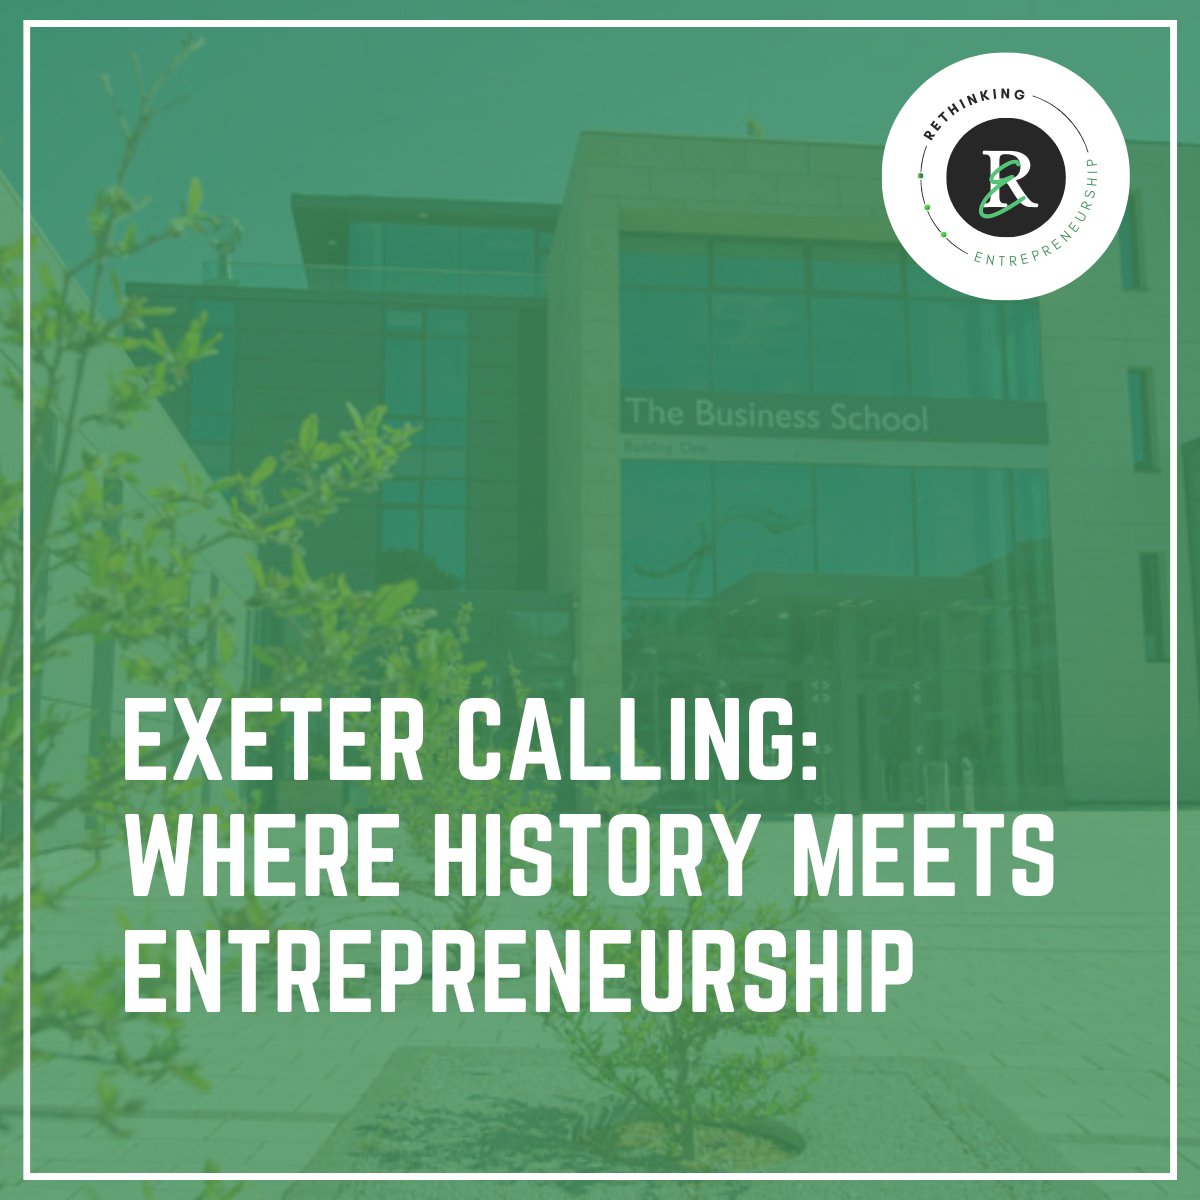 Our project team is off to The University of Exeter Business School Research Methods Centre for a unique research experience. Stay tuned for insights into historical entrepreneurship research. 🌍✨ #RethinkingEntrepreneurship #ResearchJourney #Entrepreneurship #ExeterUniversity